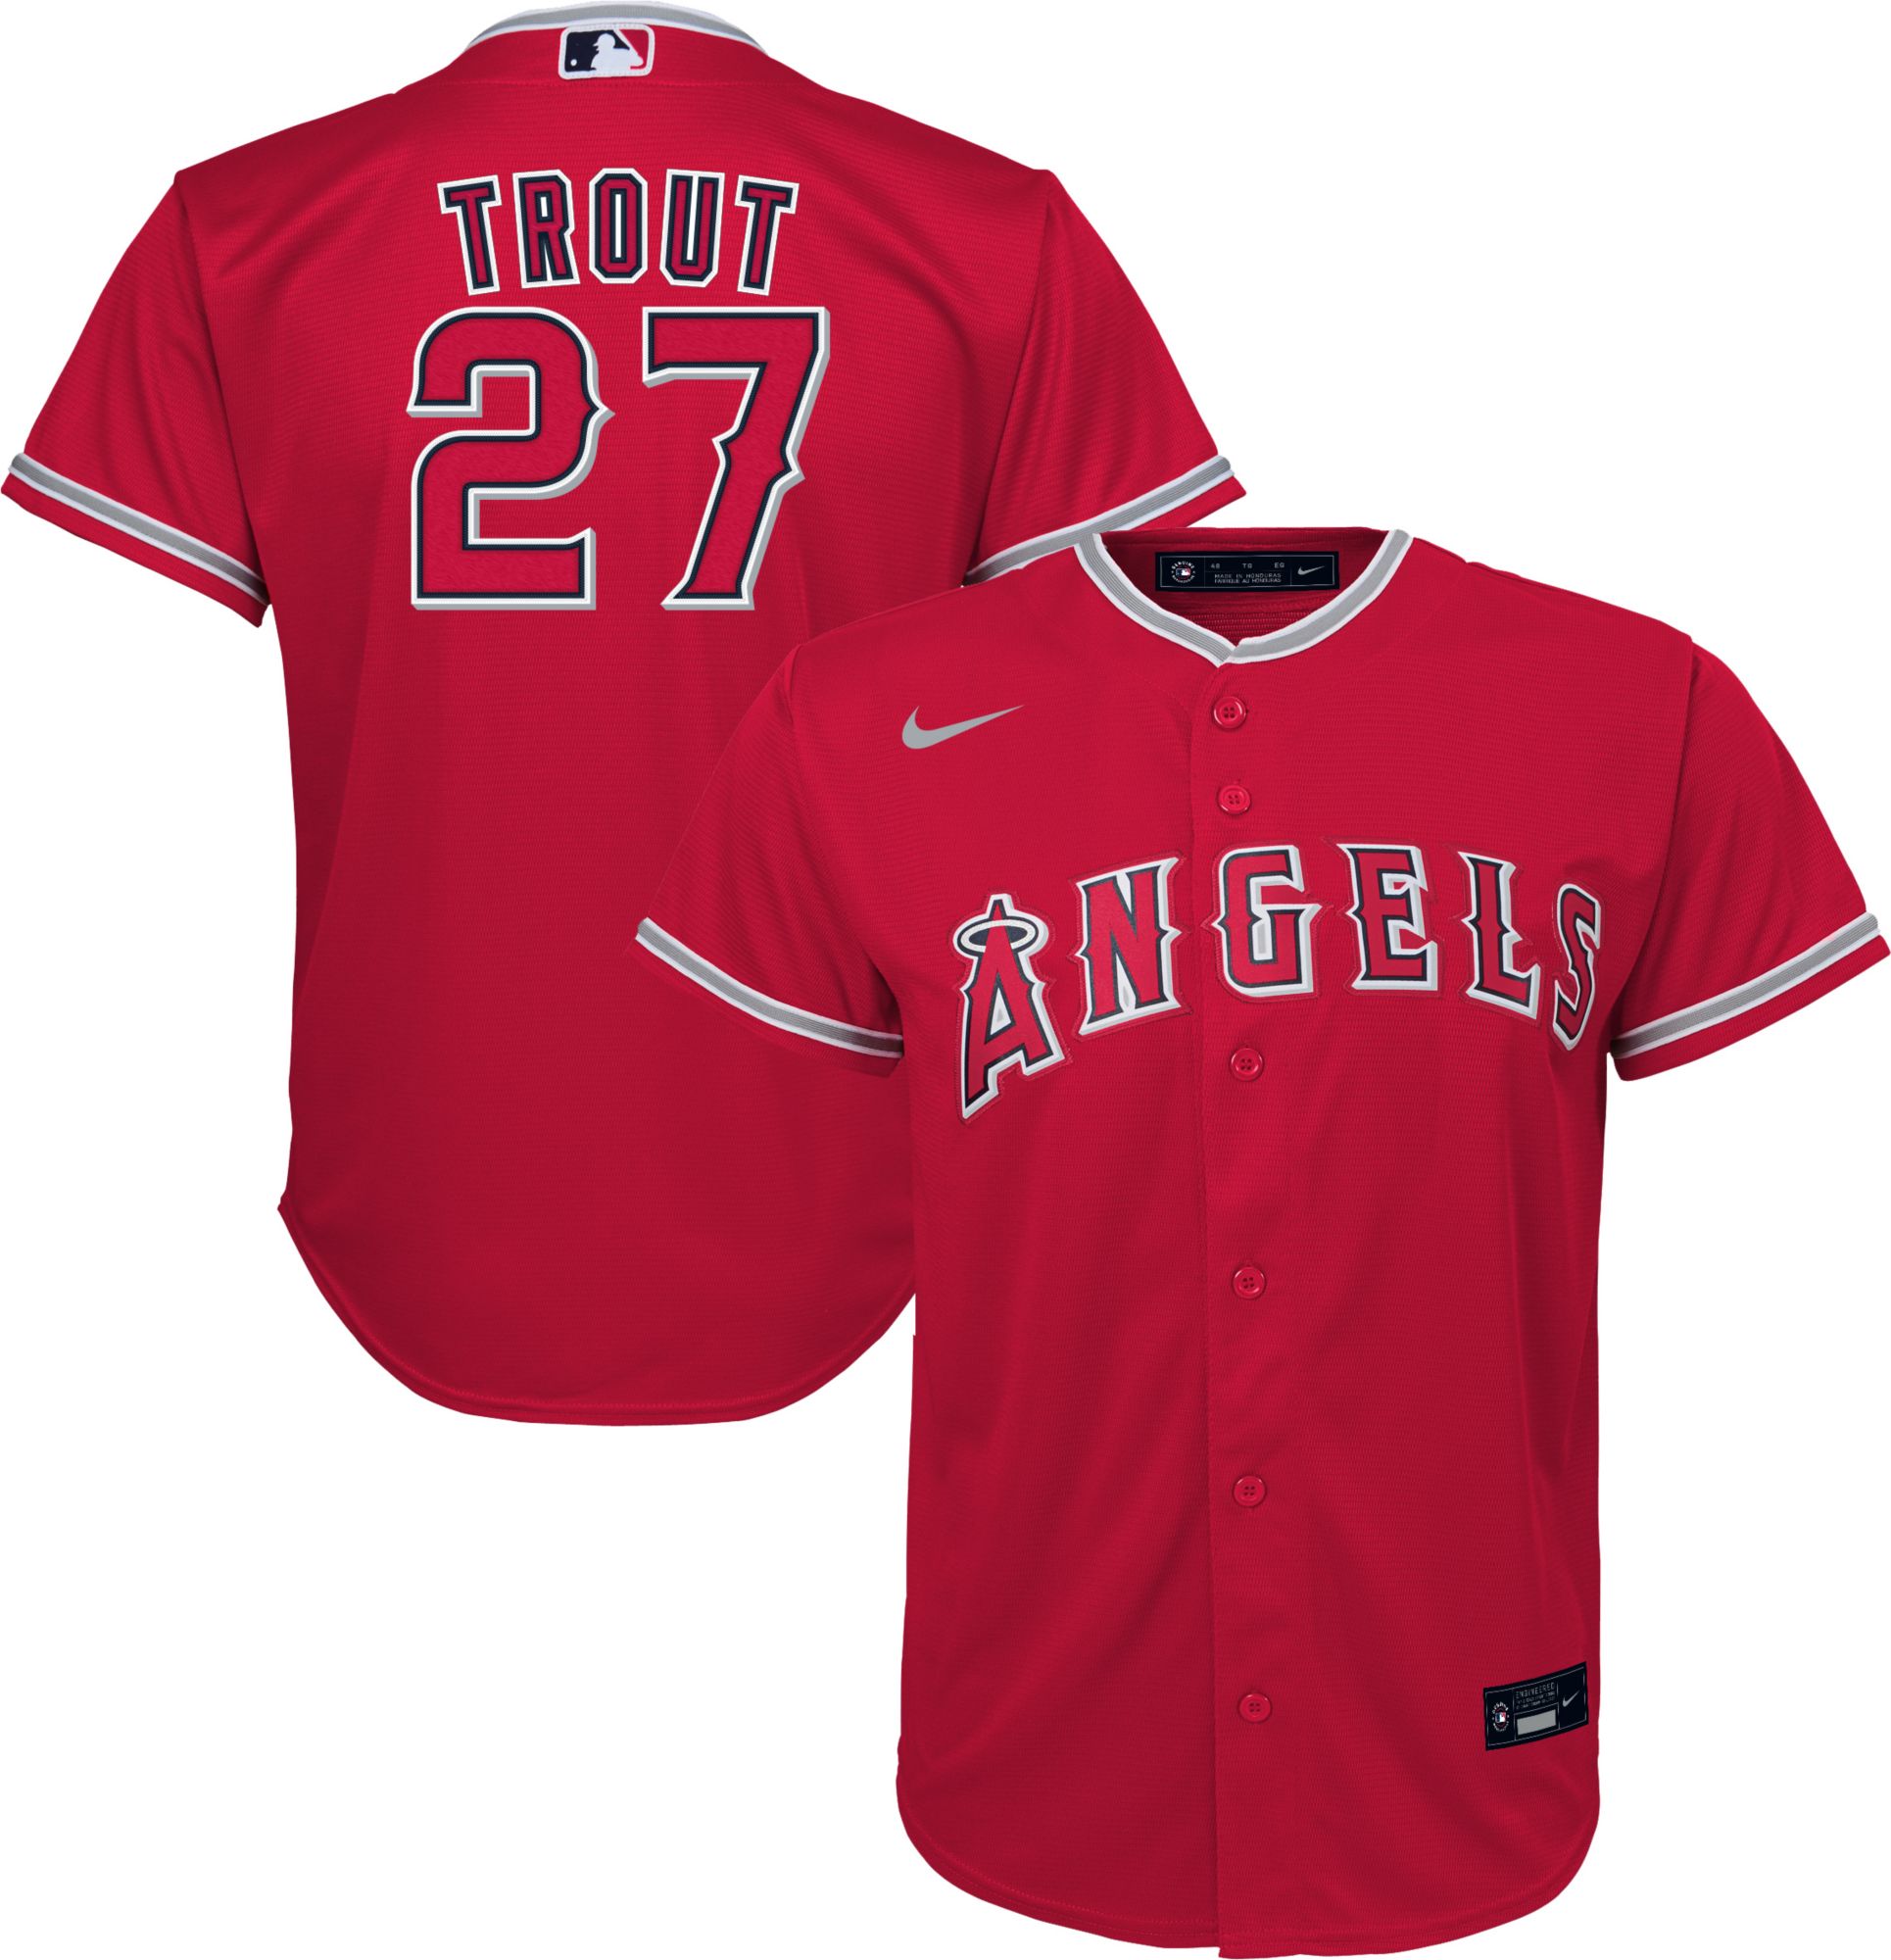 Los Angeles Angels on X: Visit the Angel Stadium Team Store for stadium-exclusive  Ohtani MVP merchandise! Shop MVP-branded shirts, pins, magnets, and more.  The Angel Stadium Team Store is open Monday through